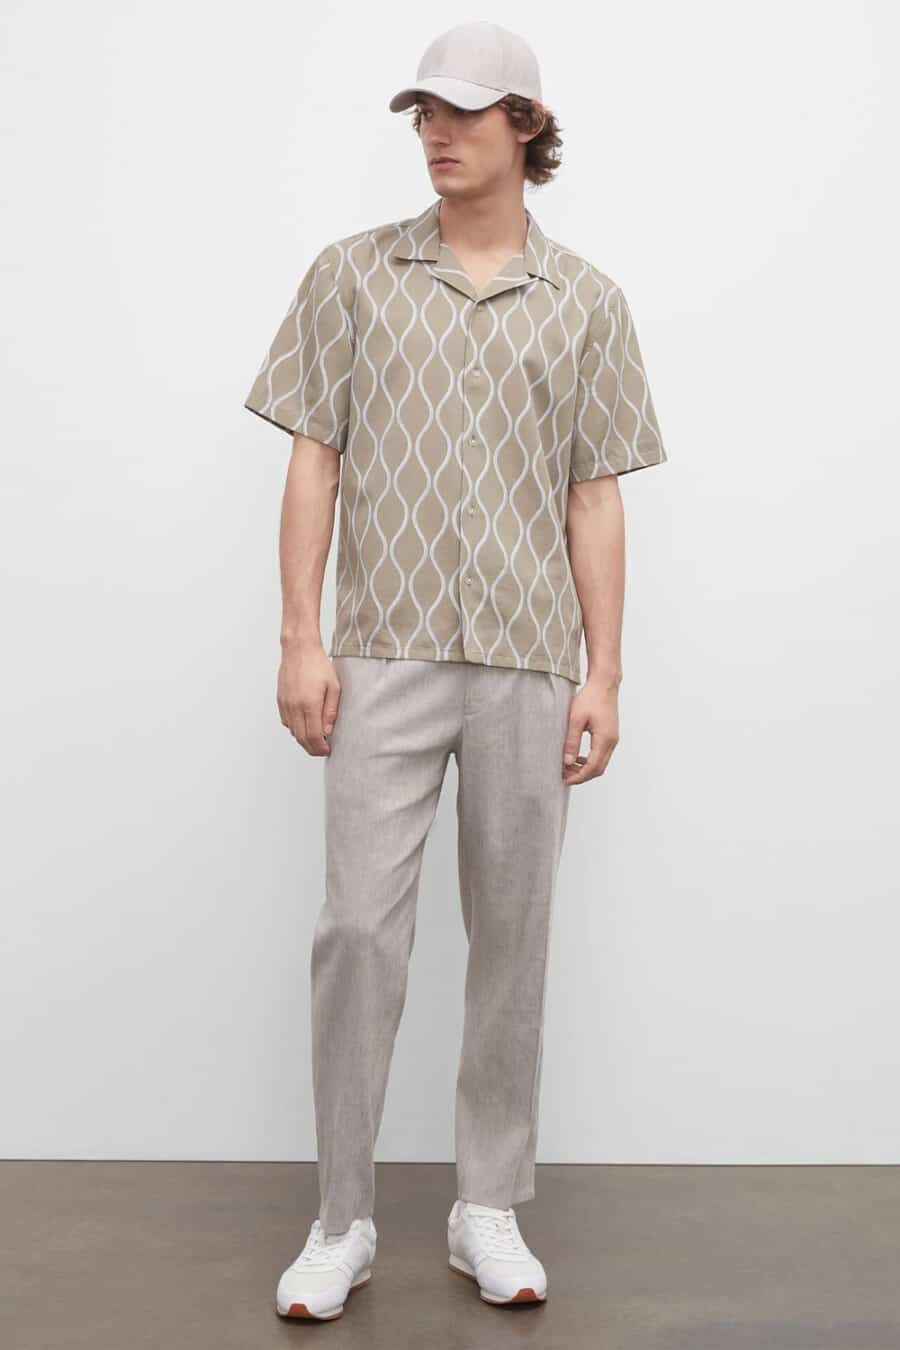 Men's light grey linen trousers, patterned brown short sleeve shirt, white sneakers and light grey baseball cap outfit